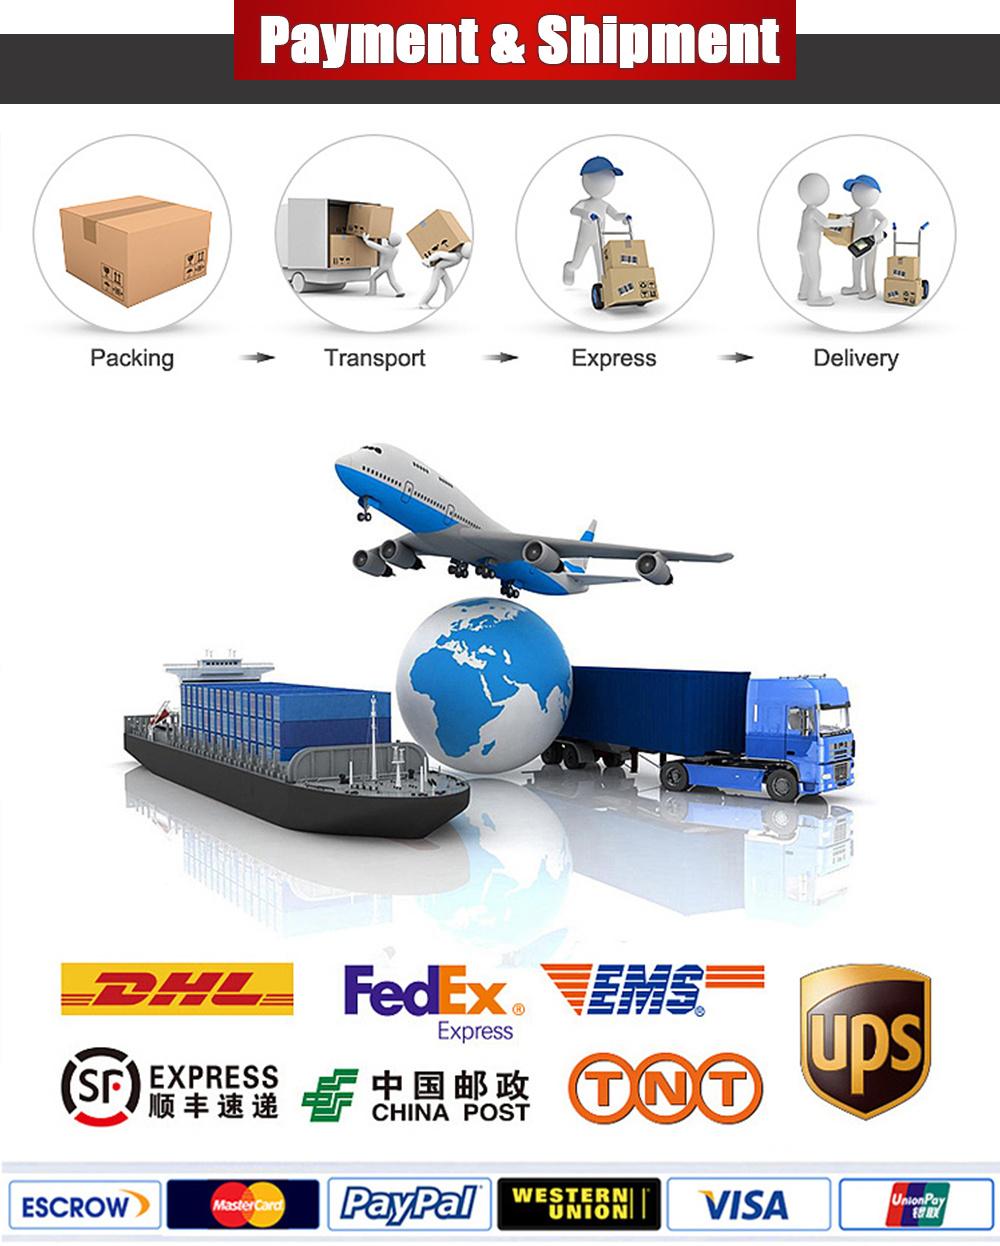 Industrial Fiber/CO2/UV Flying Non-Standard Laser Marking Printer Equipment Machine with Visual Positioning System